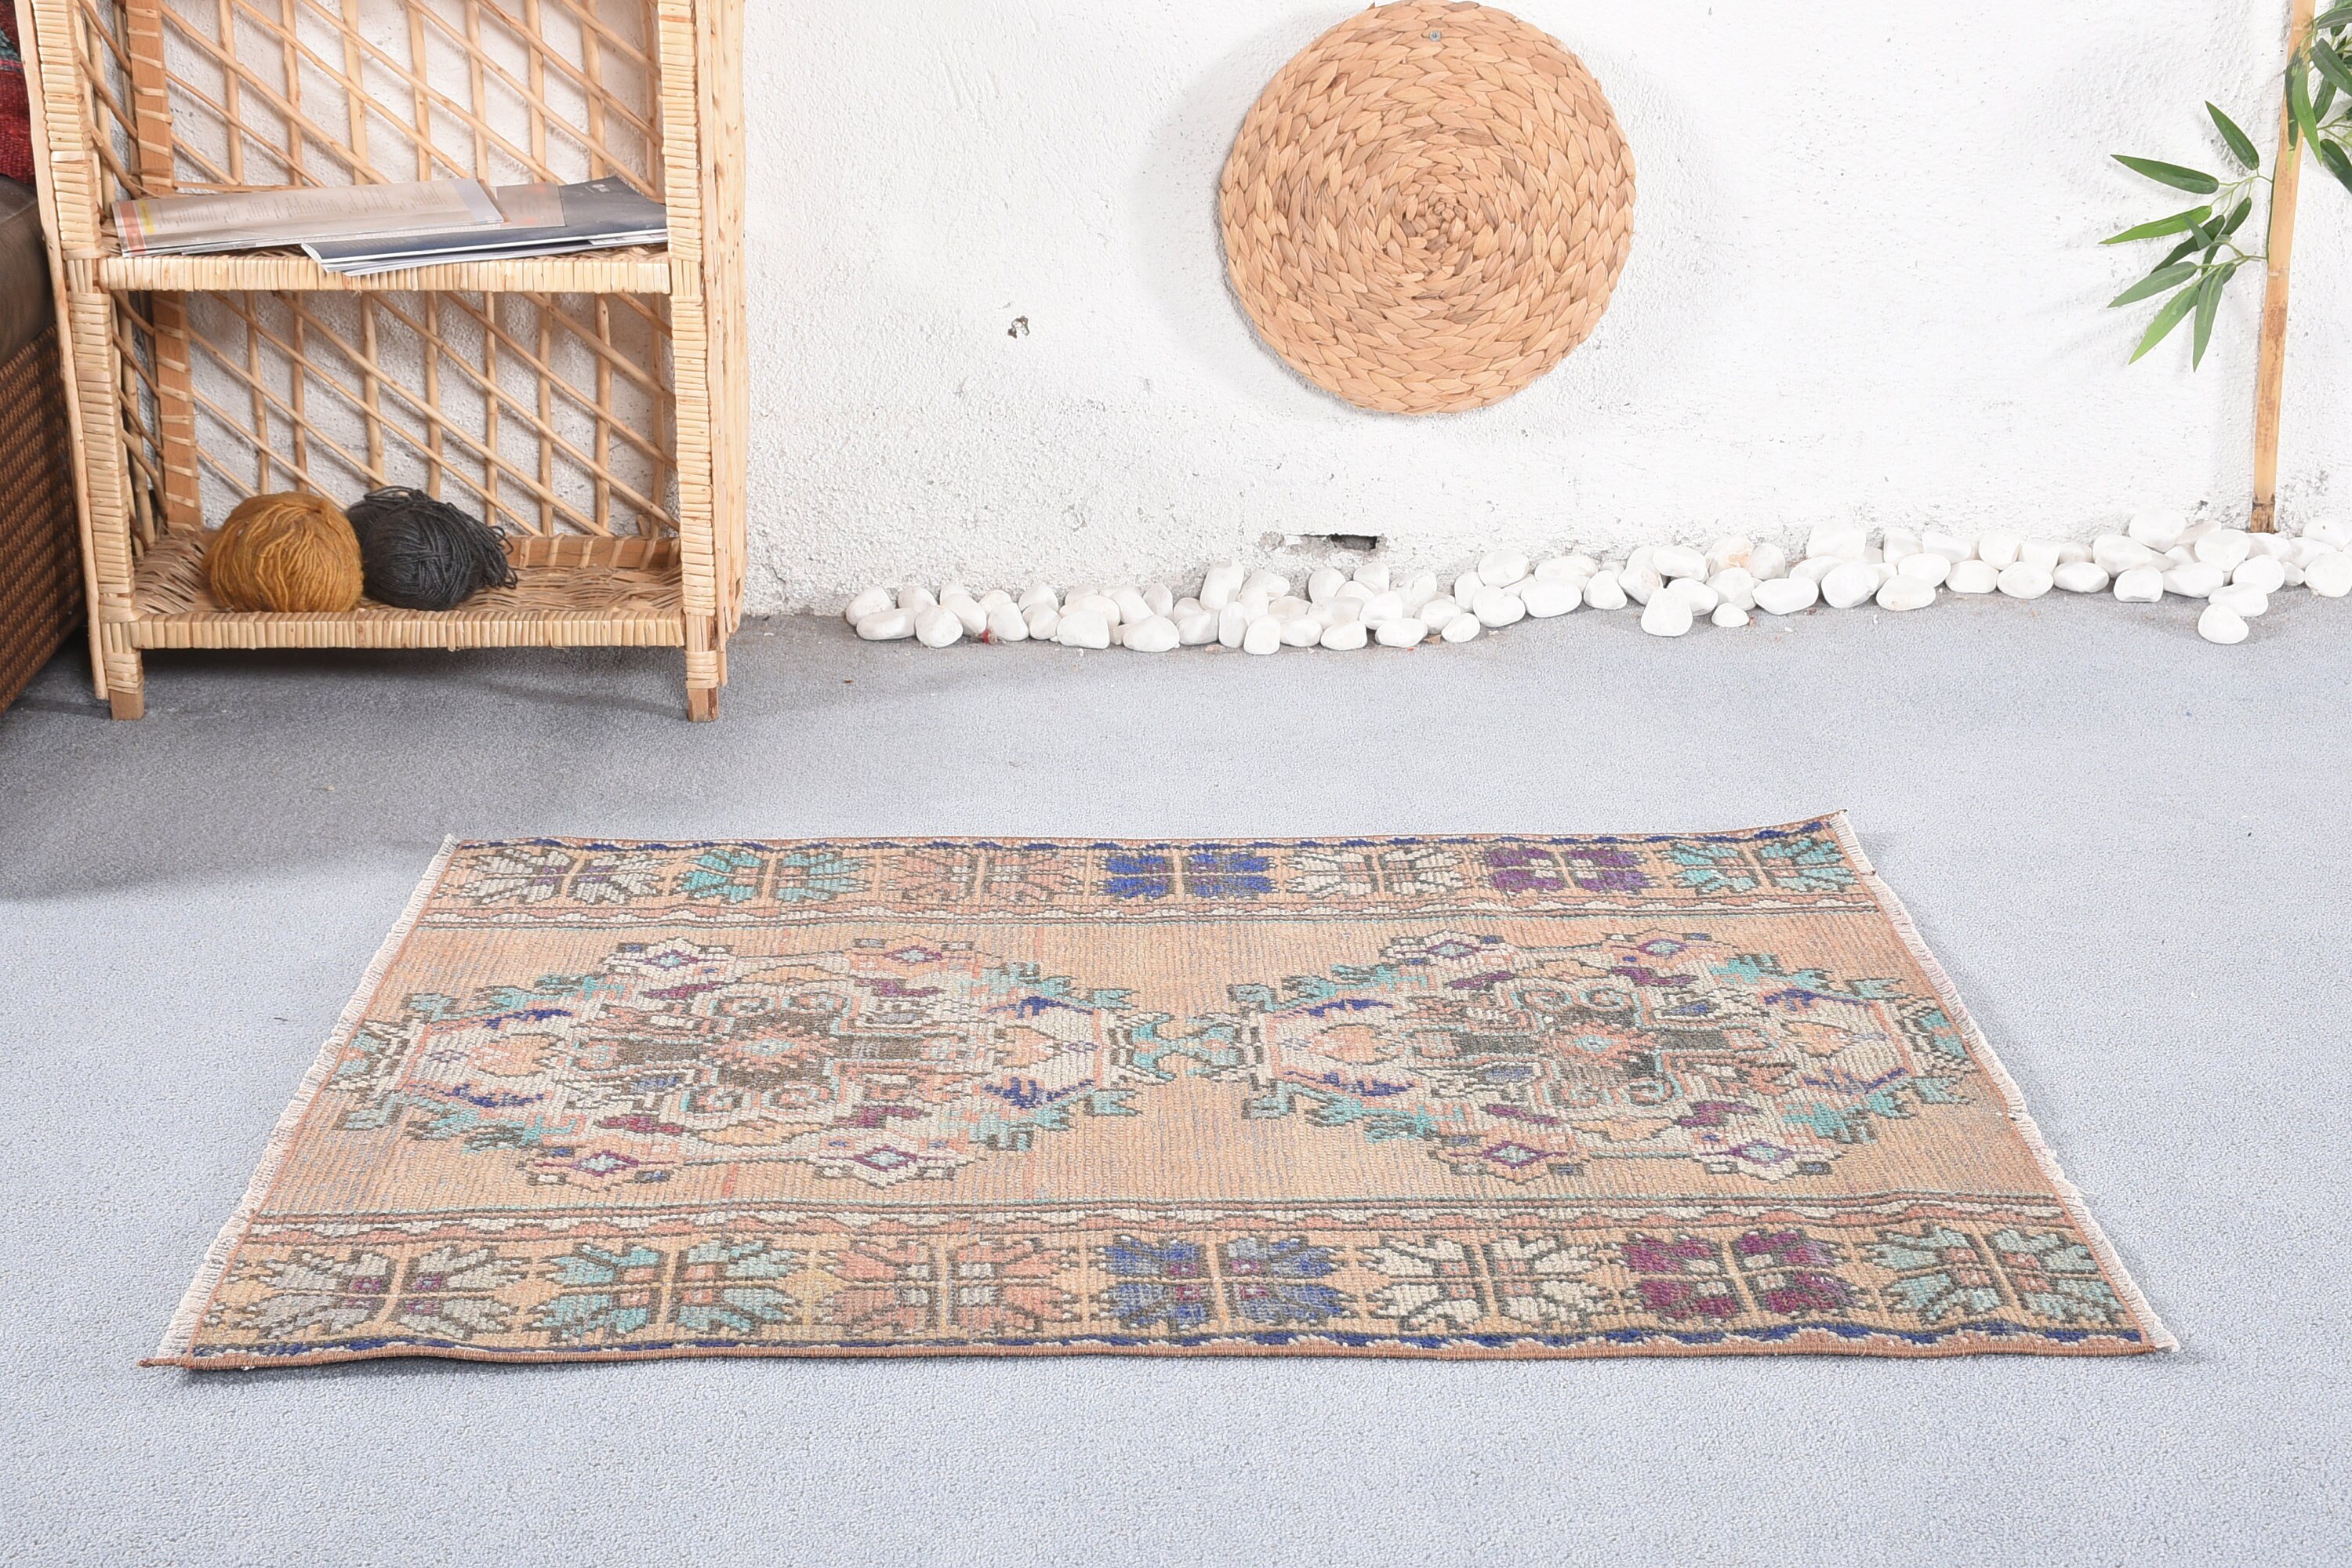 3x3.3 ft Small Rugs, Vintage Rug, Oriental Rugs, Kitchen Rugs, Entry Rugs, Turkish Rugs, Floor Rug, Brown Cool Rug, Rugs for Wall Hanging